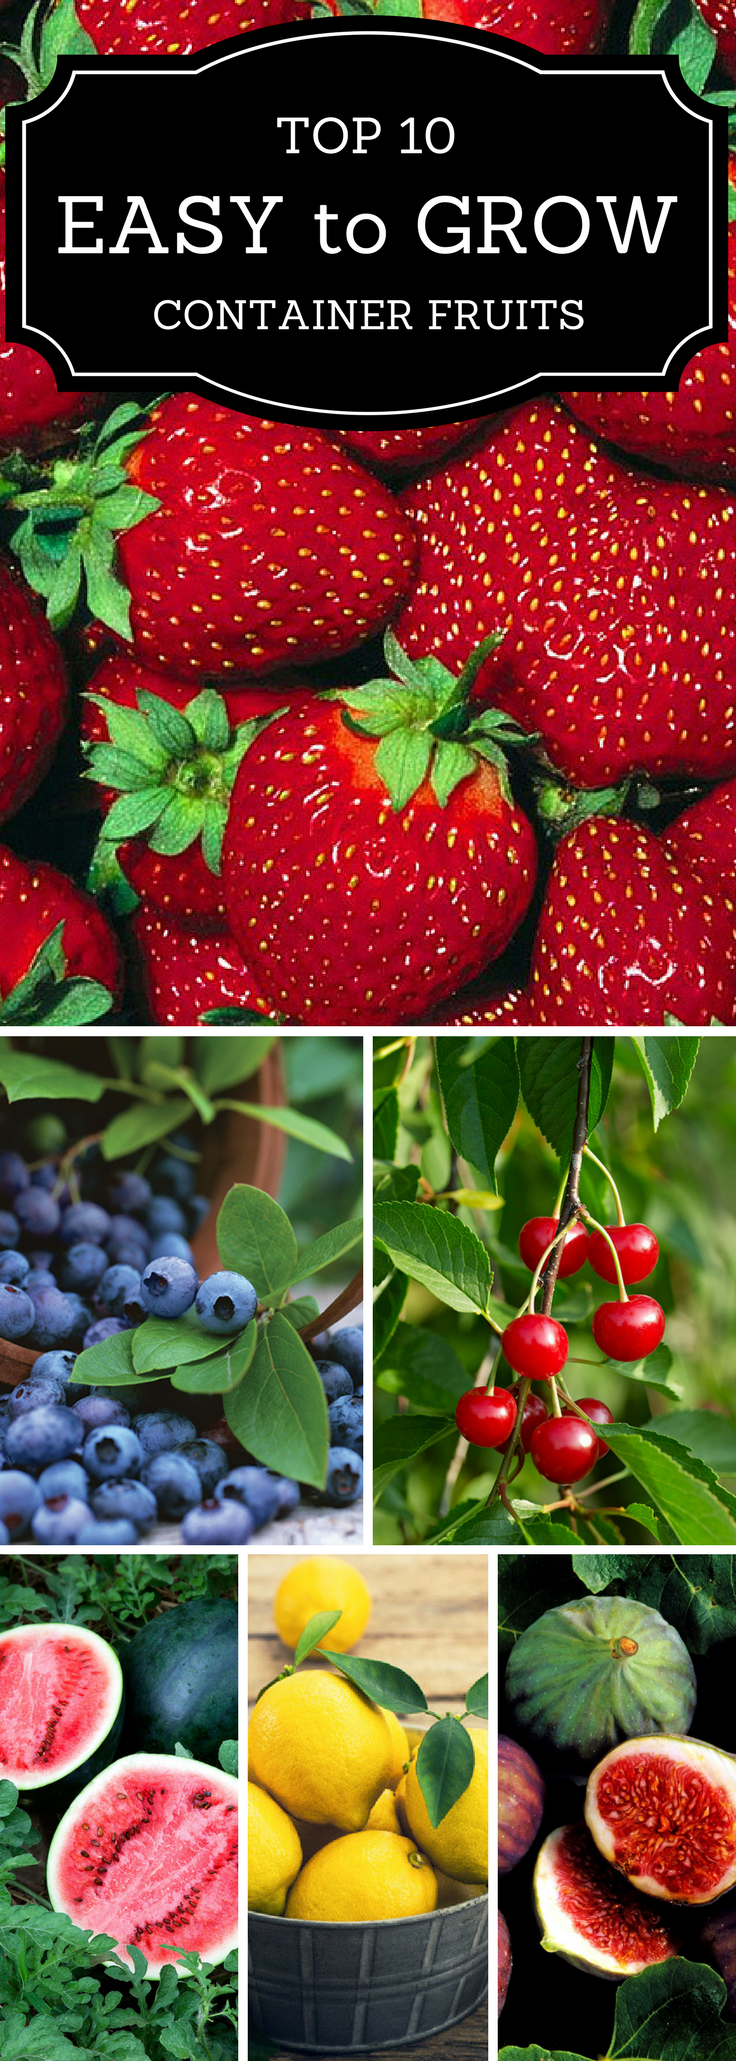 Top 10 Easy to Grow Container Fruits